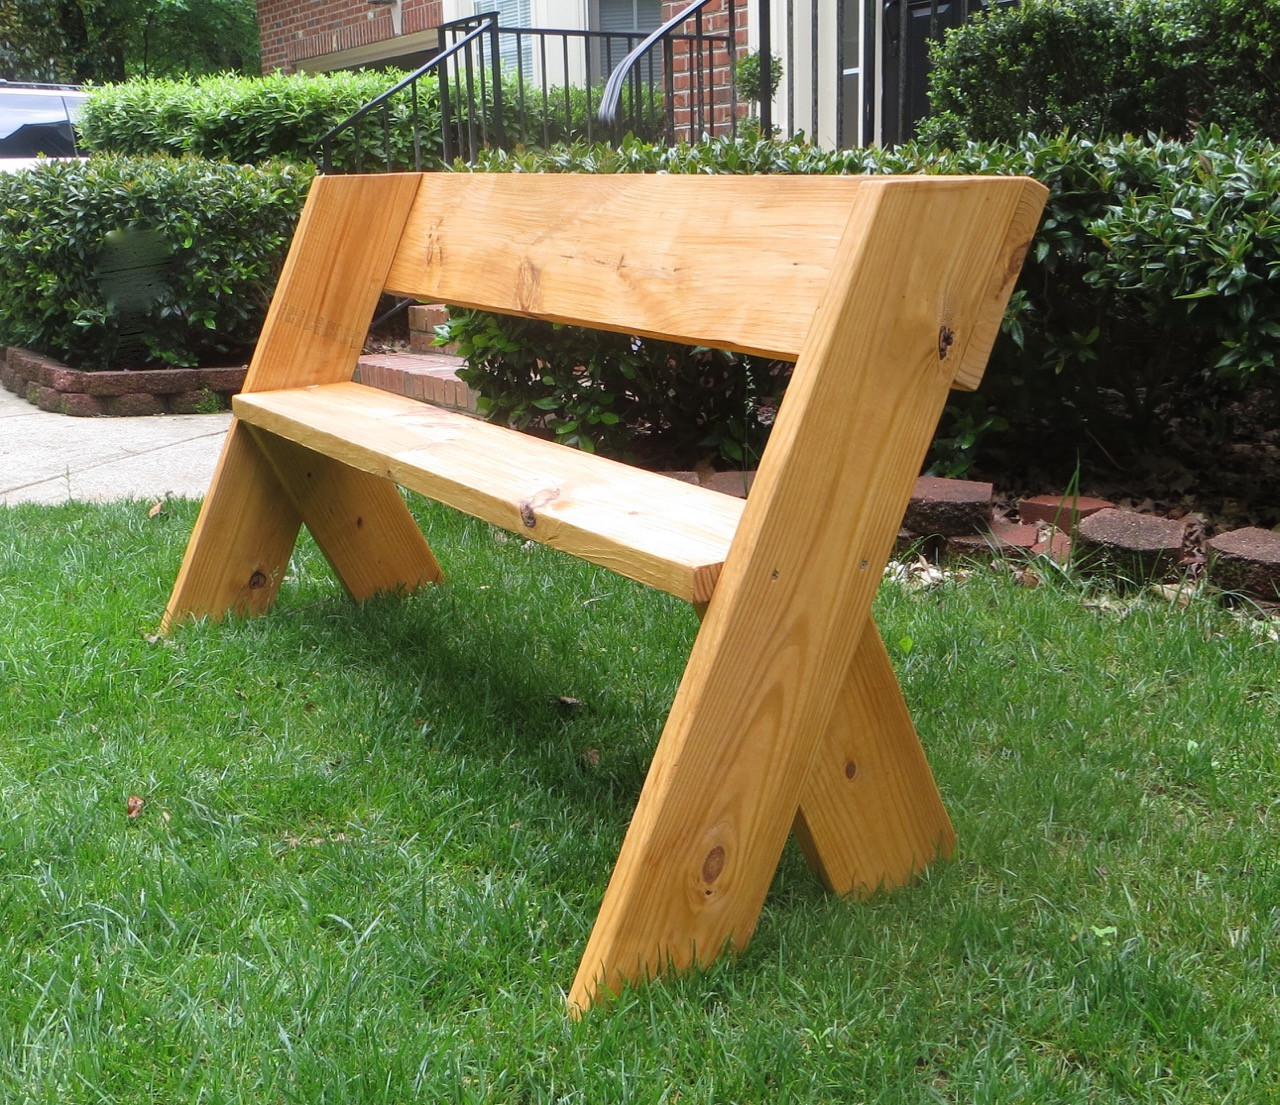 DIY Outdoor Workbench
 The Project Lady DIY Tutorial – $16 Simple Outdoor Wood